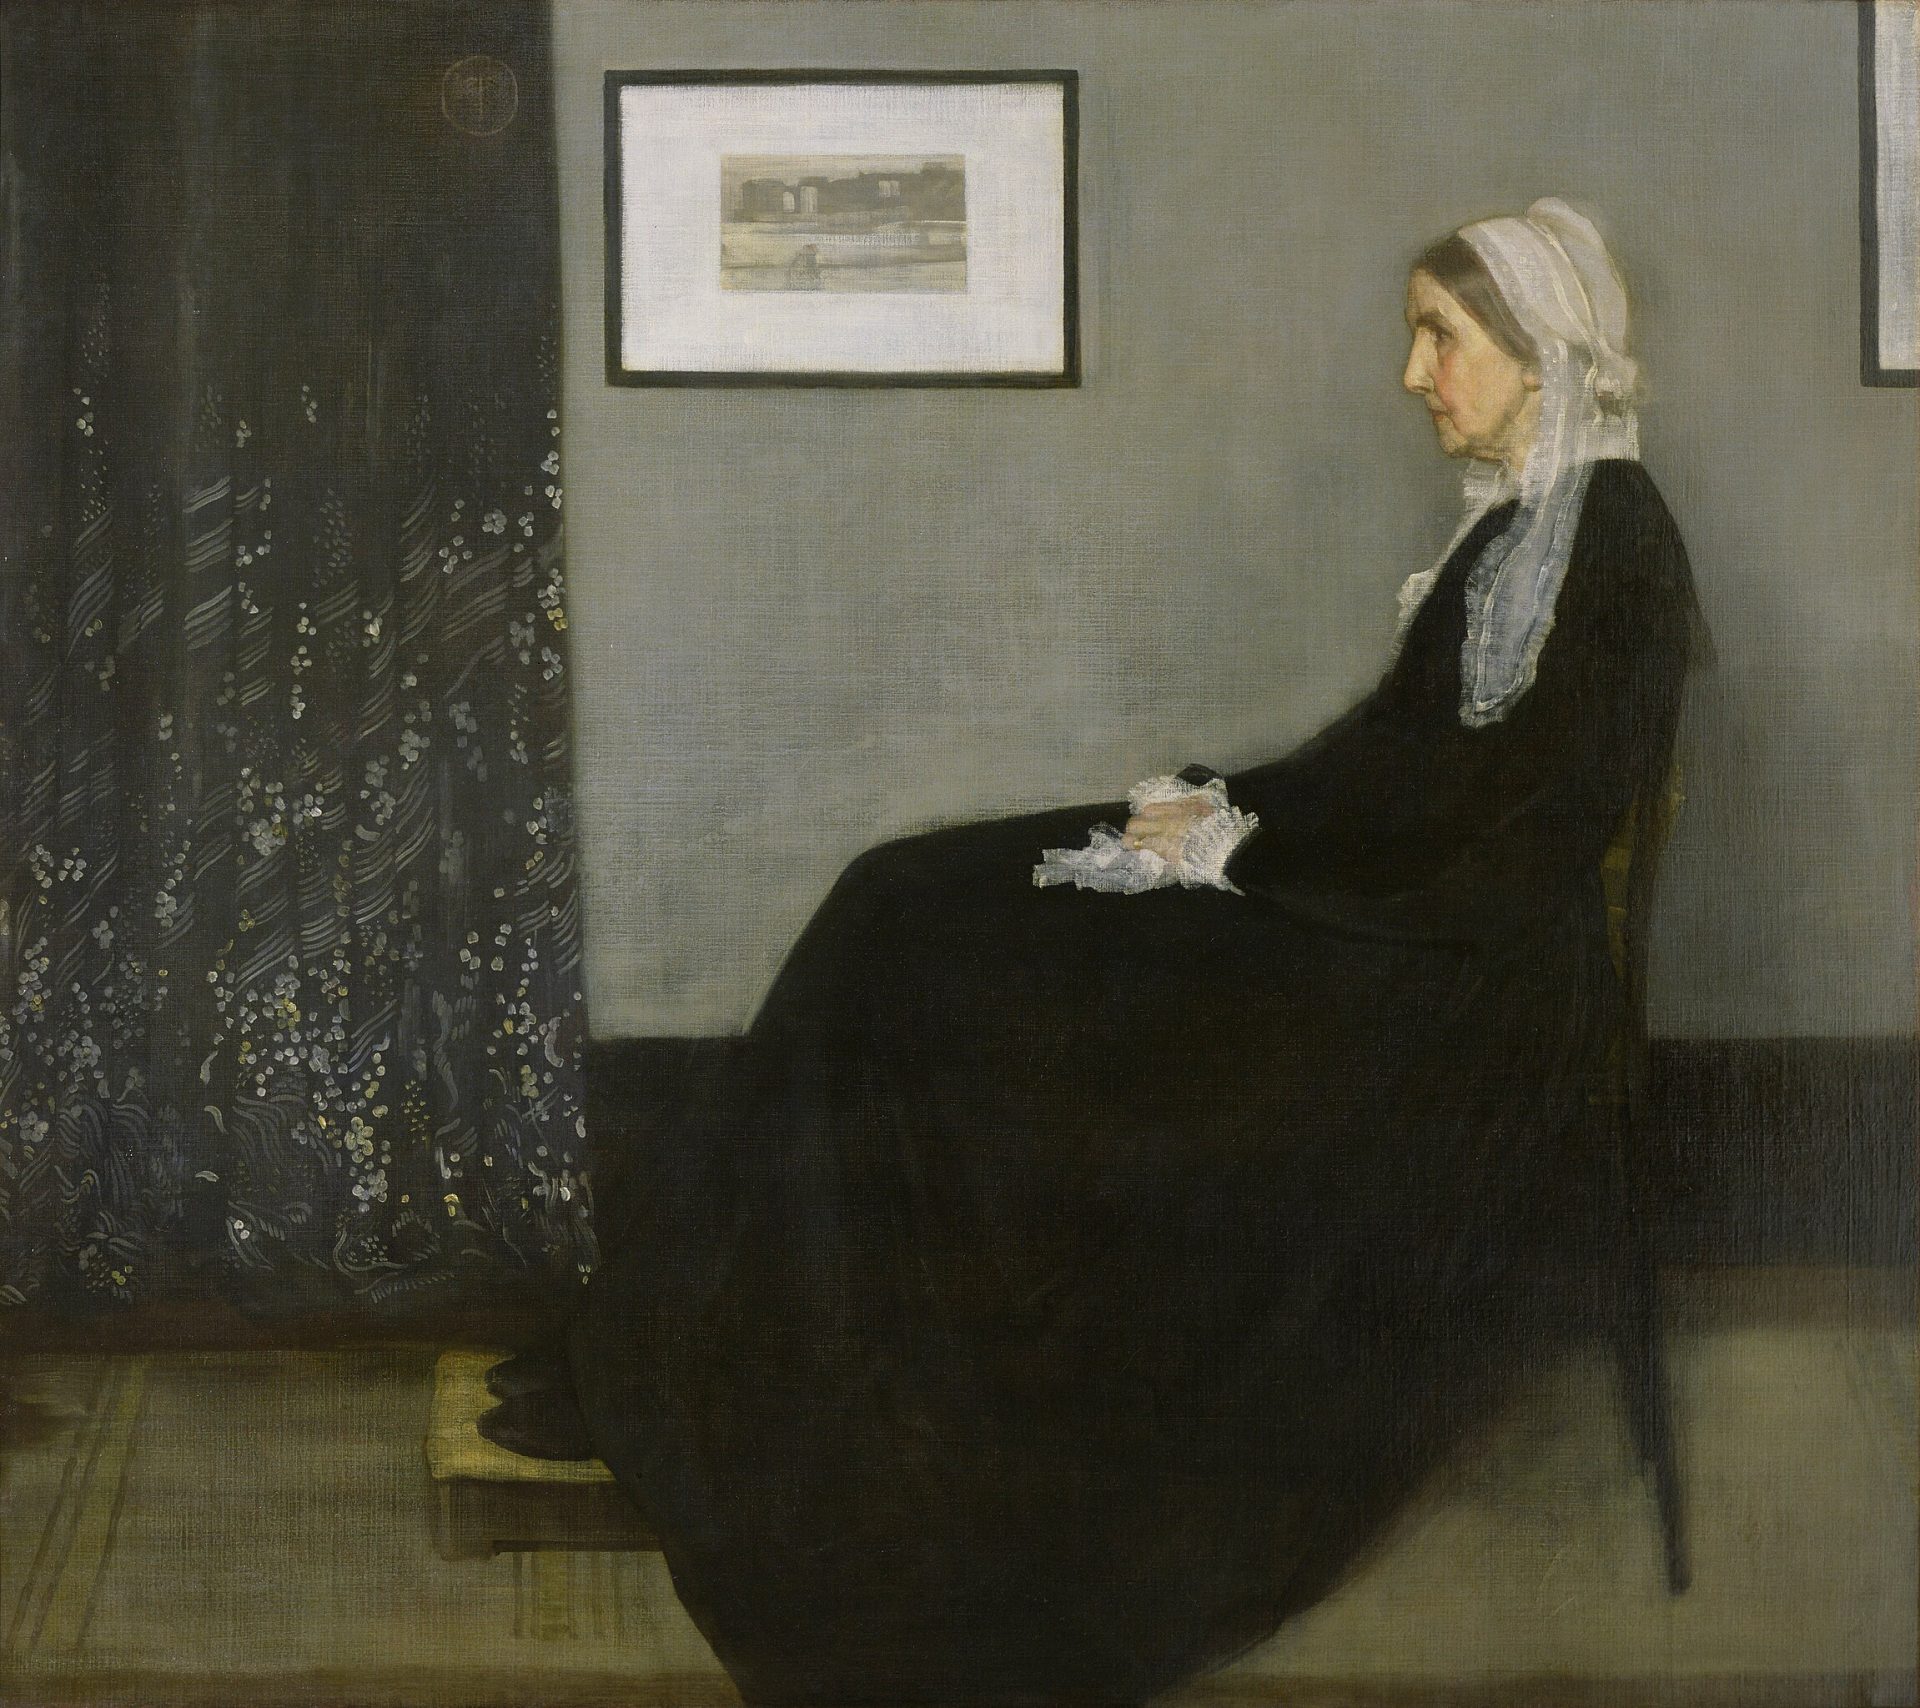 A painting of an older woman, seated with her hands folded in her lap. The figure, depicted as “Whistler's Mother”, gazes down, referencing deep contemplation. She is dressed in a long, dark dress with a bonnet, evoking a Victorian era aesthetic. The room is sparse, with a hanging picture of the Thames river in the backdrop, providing a nuanced contrast to the simplicity. The overall color scheme is dominated by muted, neutral tones.